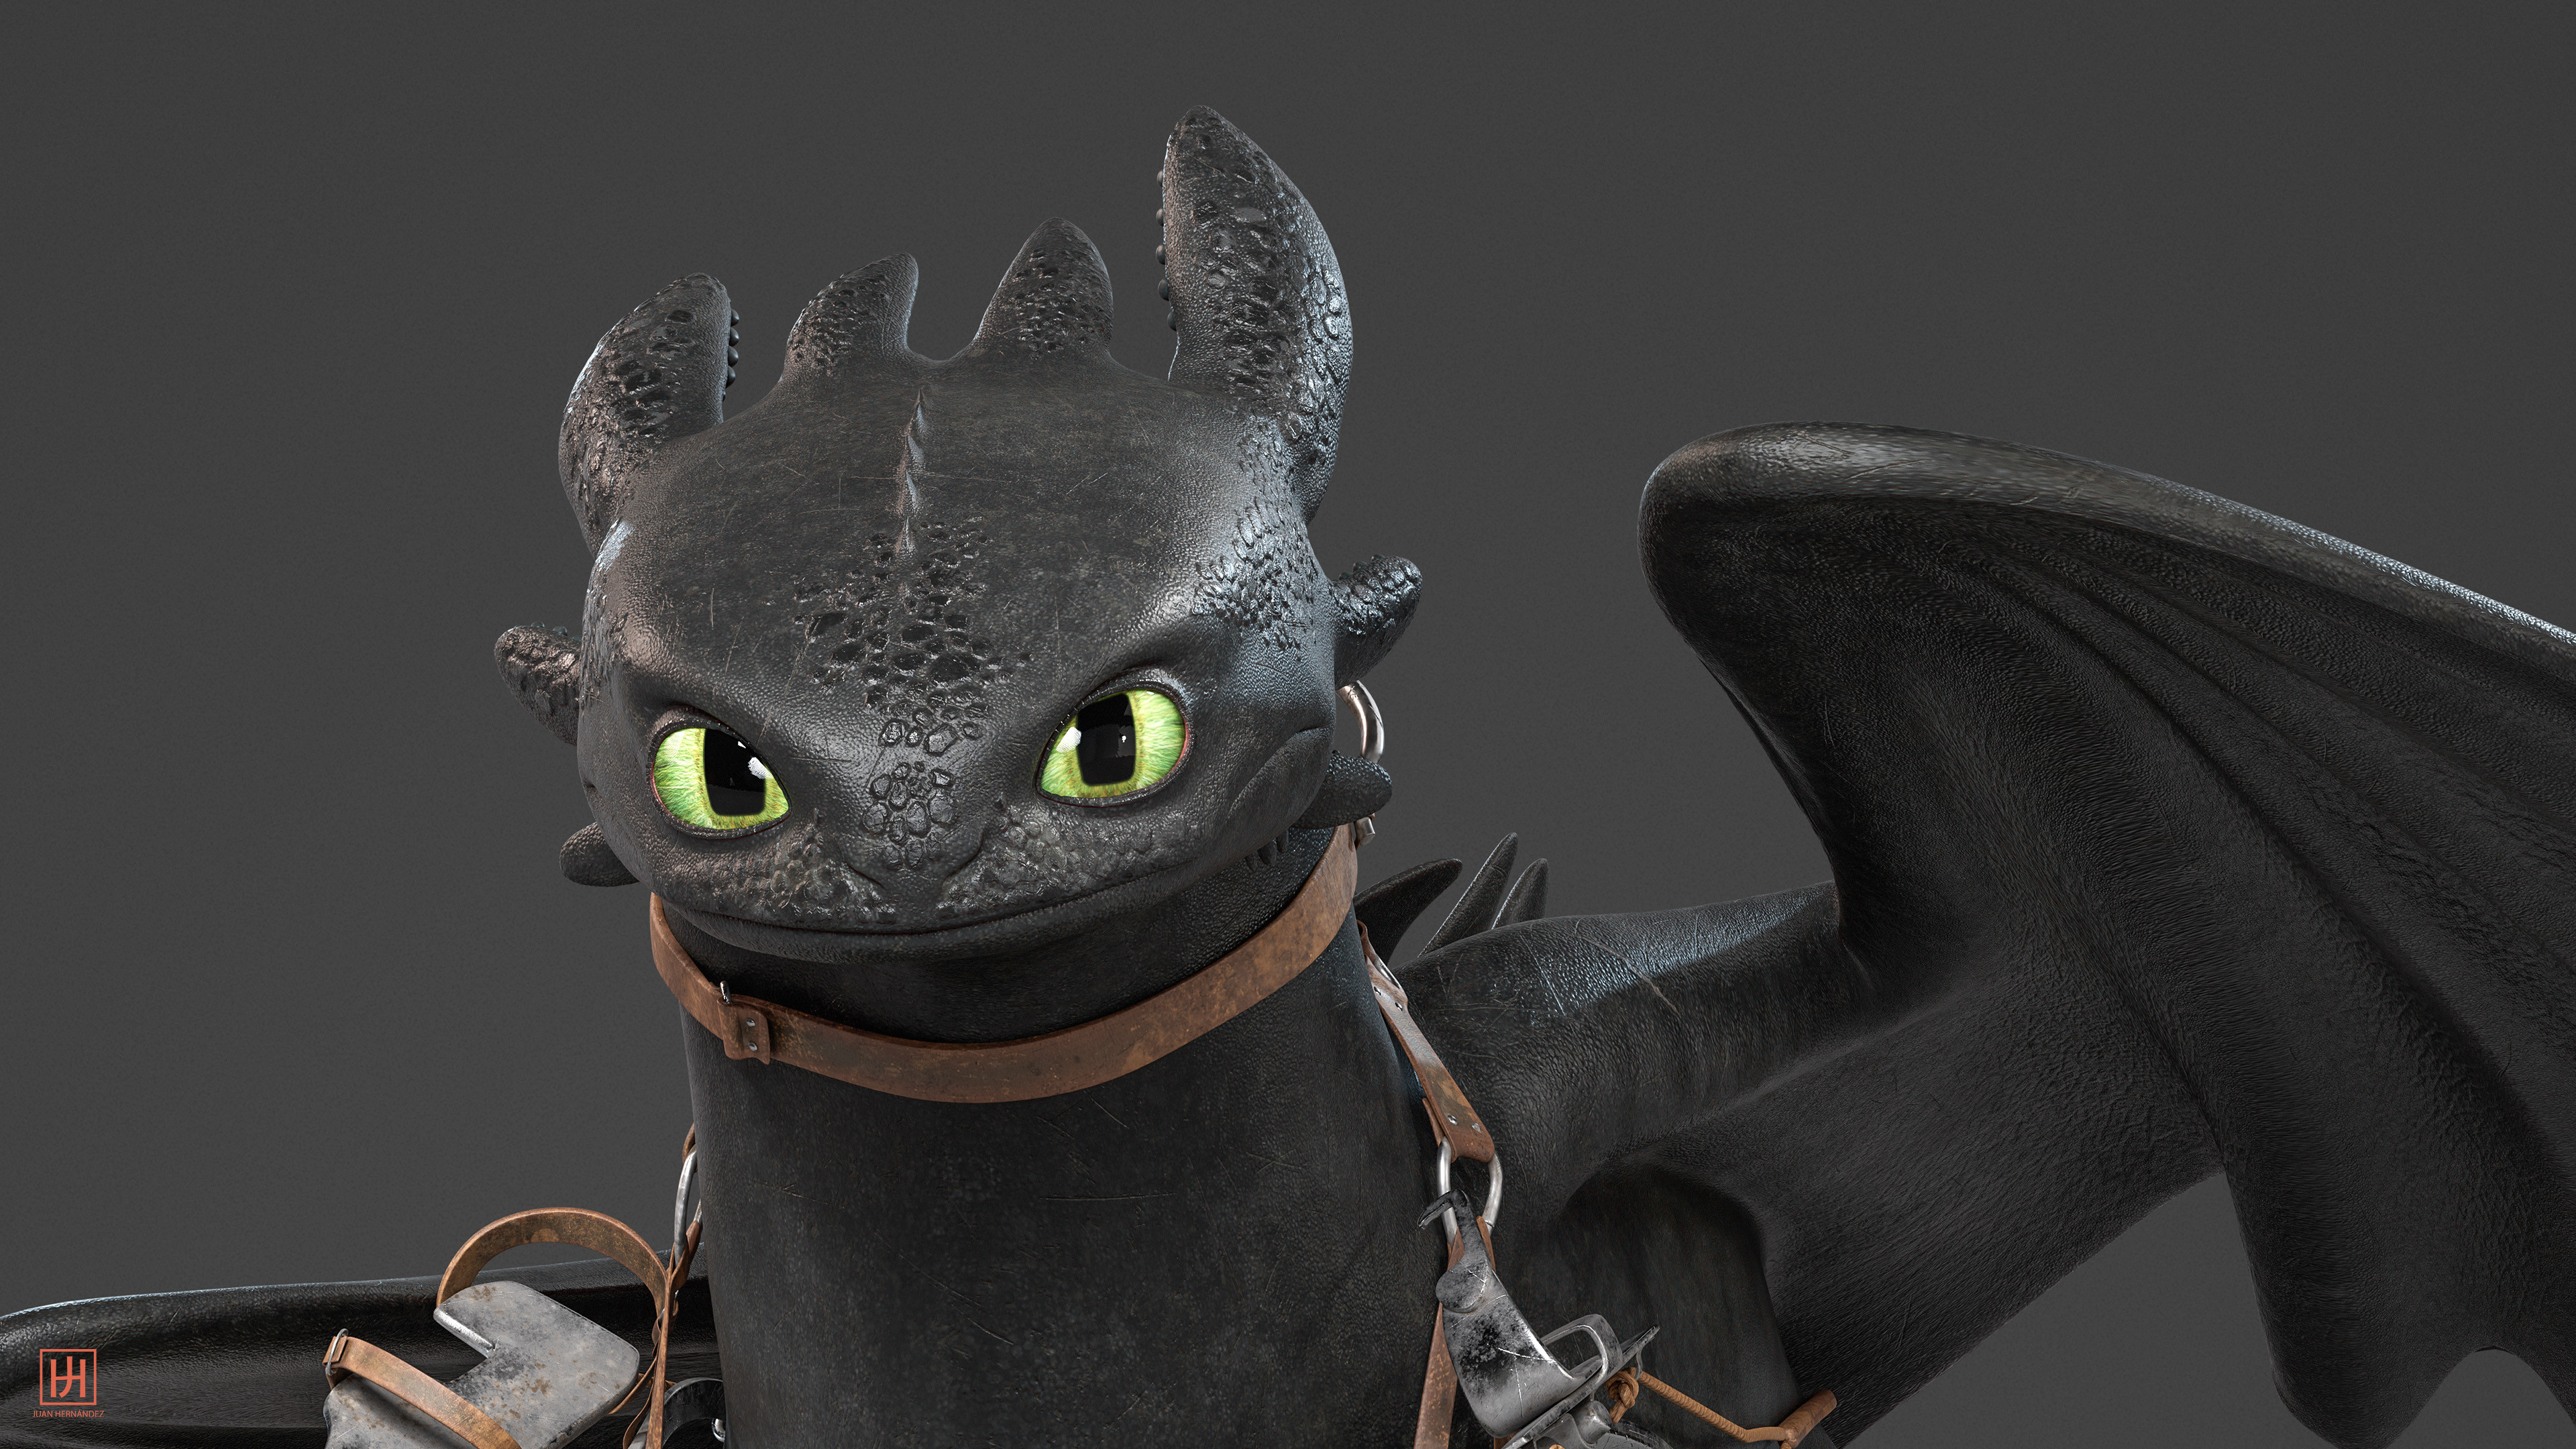 toothless how to train your dragon